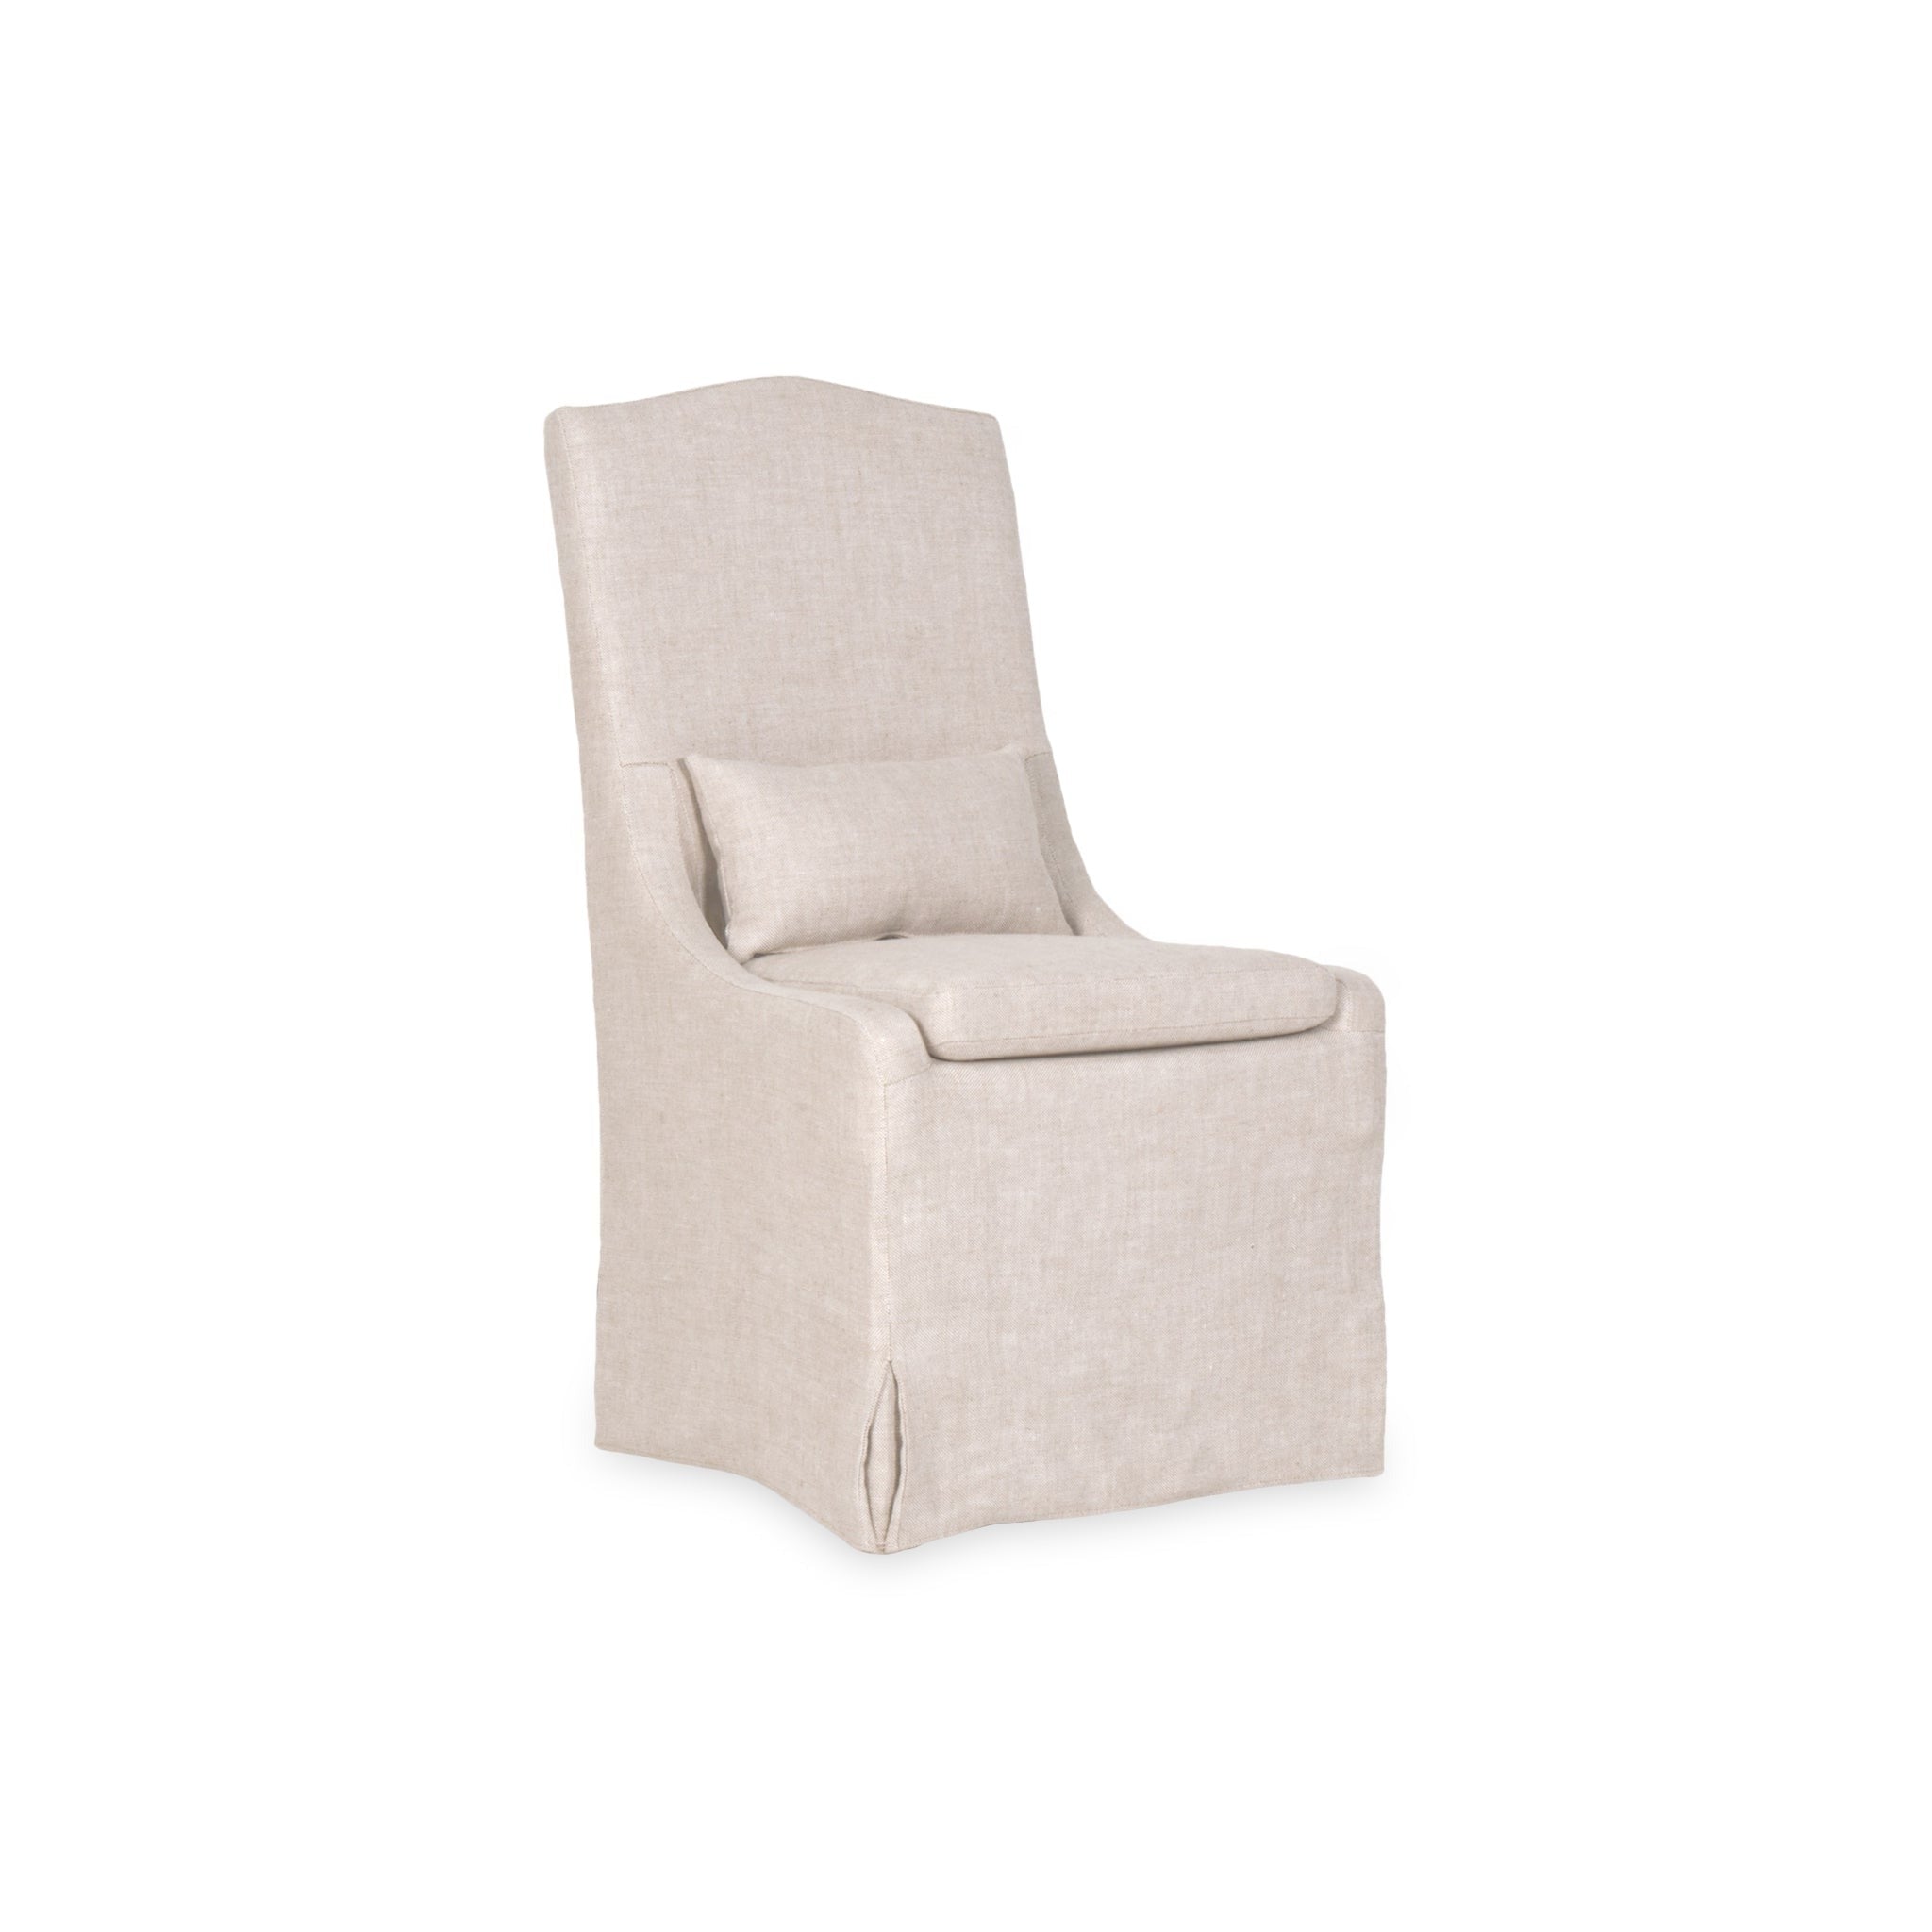 Risch Slipcover Dining Chair - Set of 2